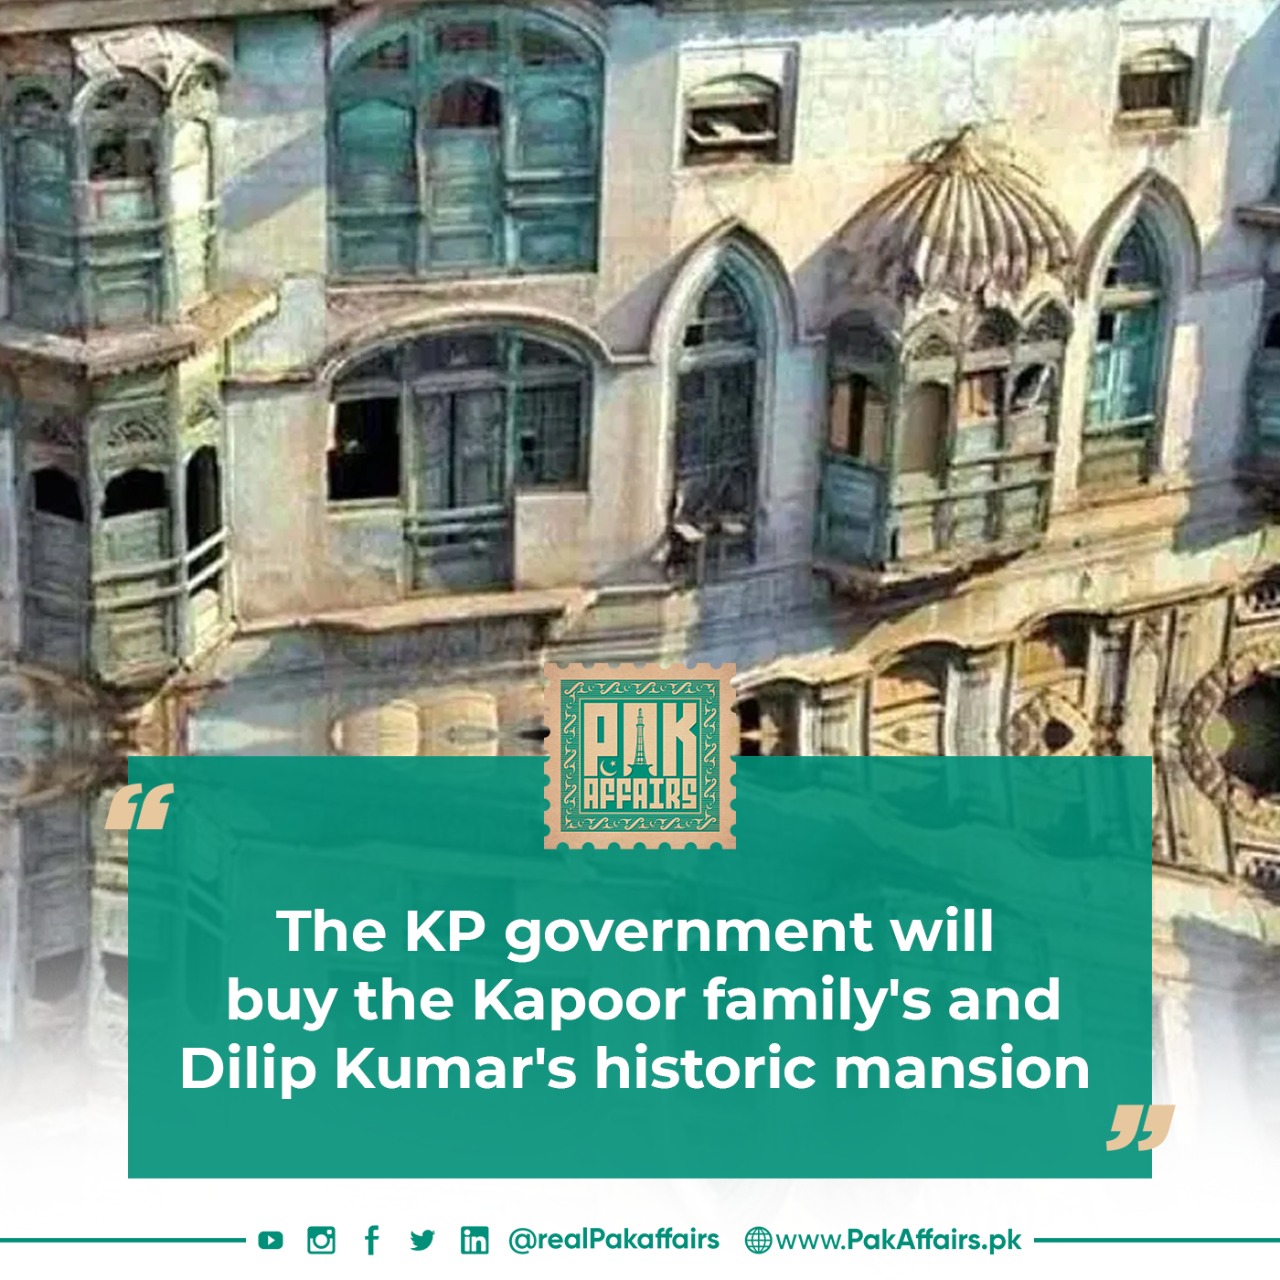 The KP government will buy the Kapoor family's and Dilip Kumar's historic mansion